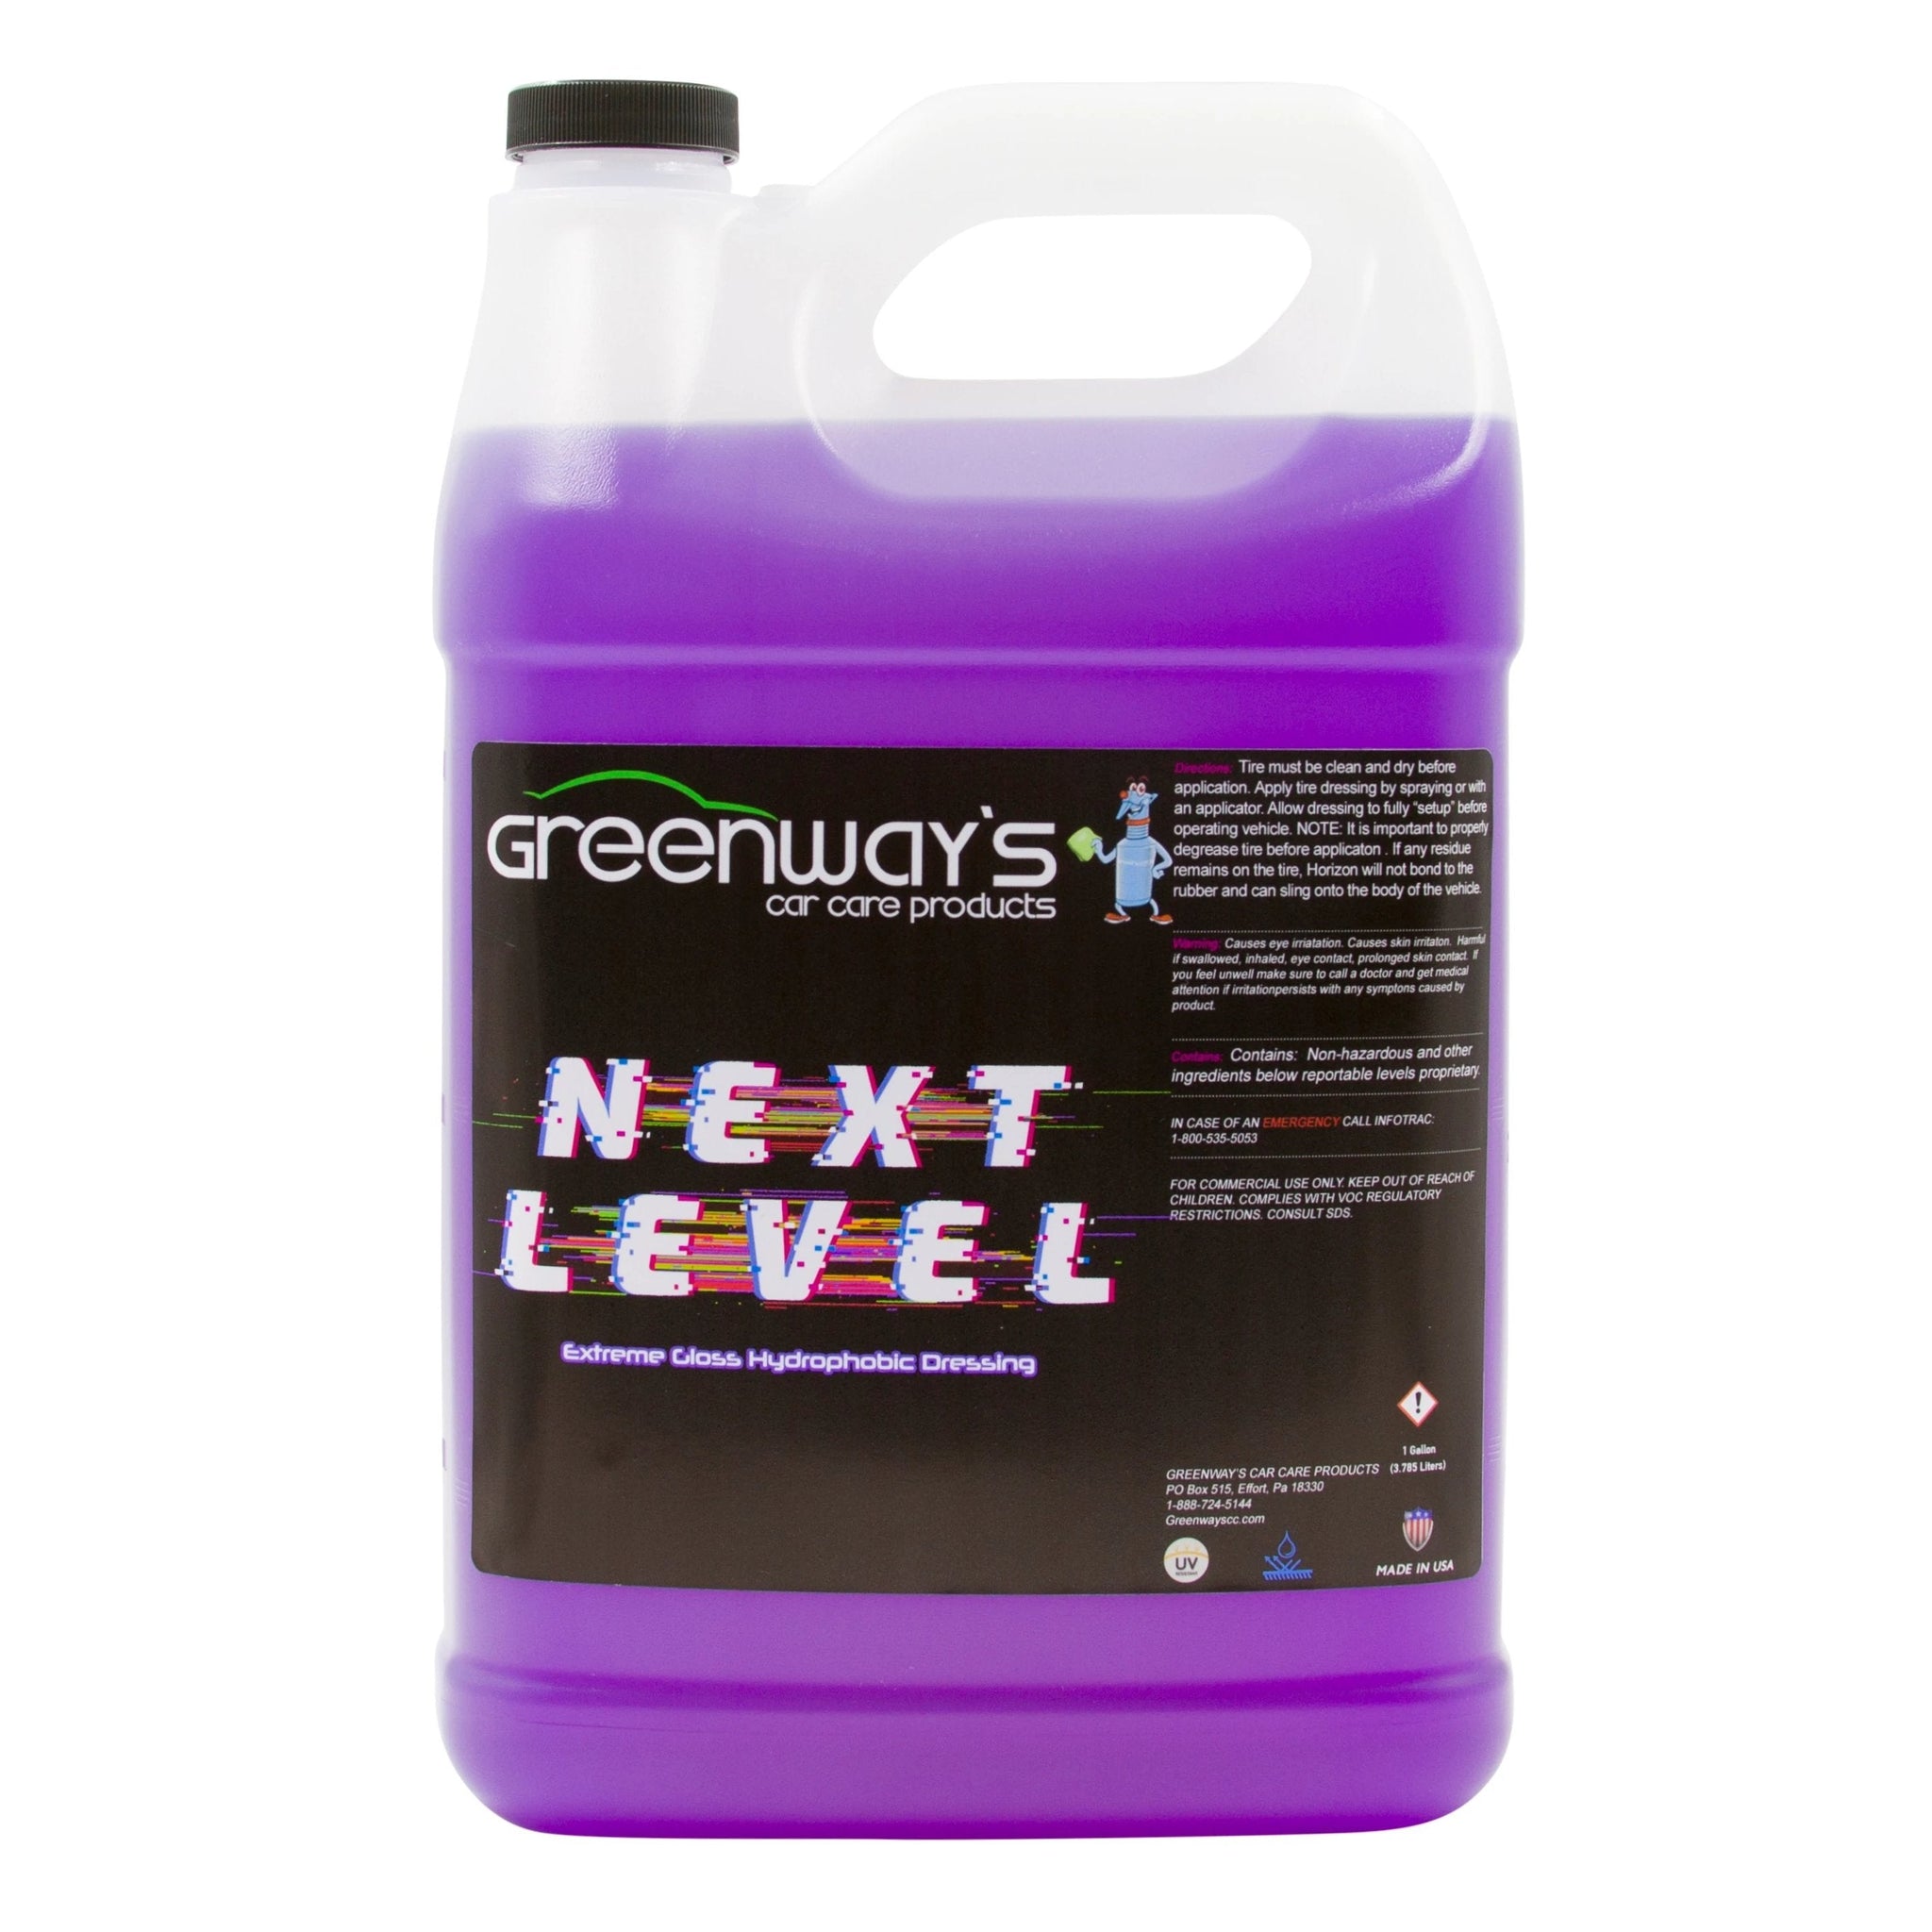 Greenway’s Next Level, extremely glossy, hydrophobic, silicone-free, water-based, sprayable tire shine. 1 gallon.